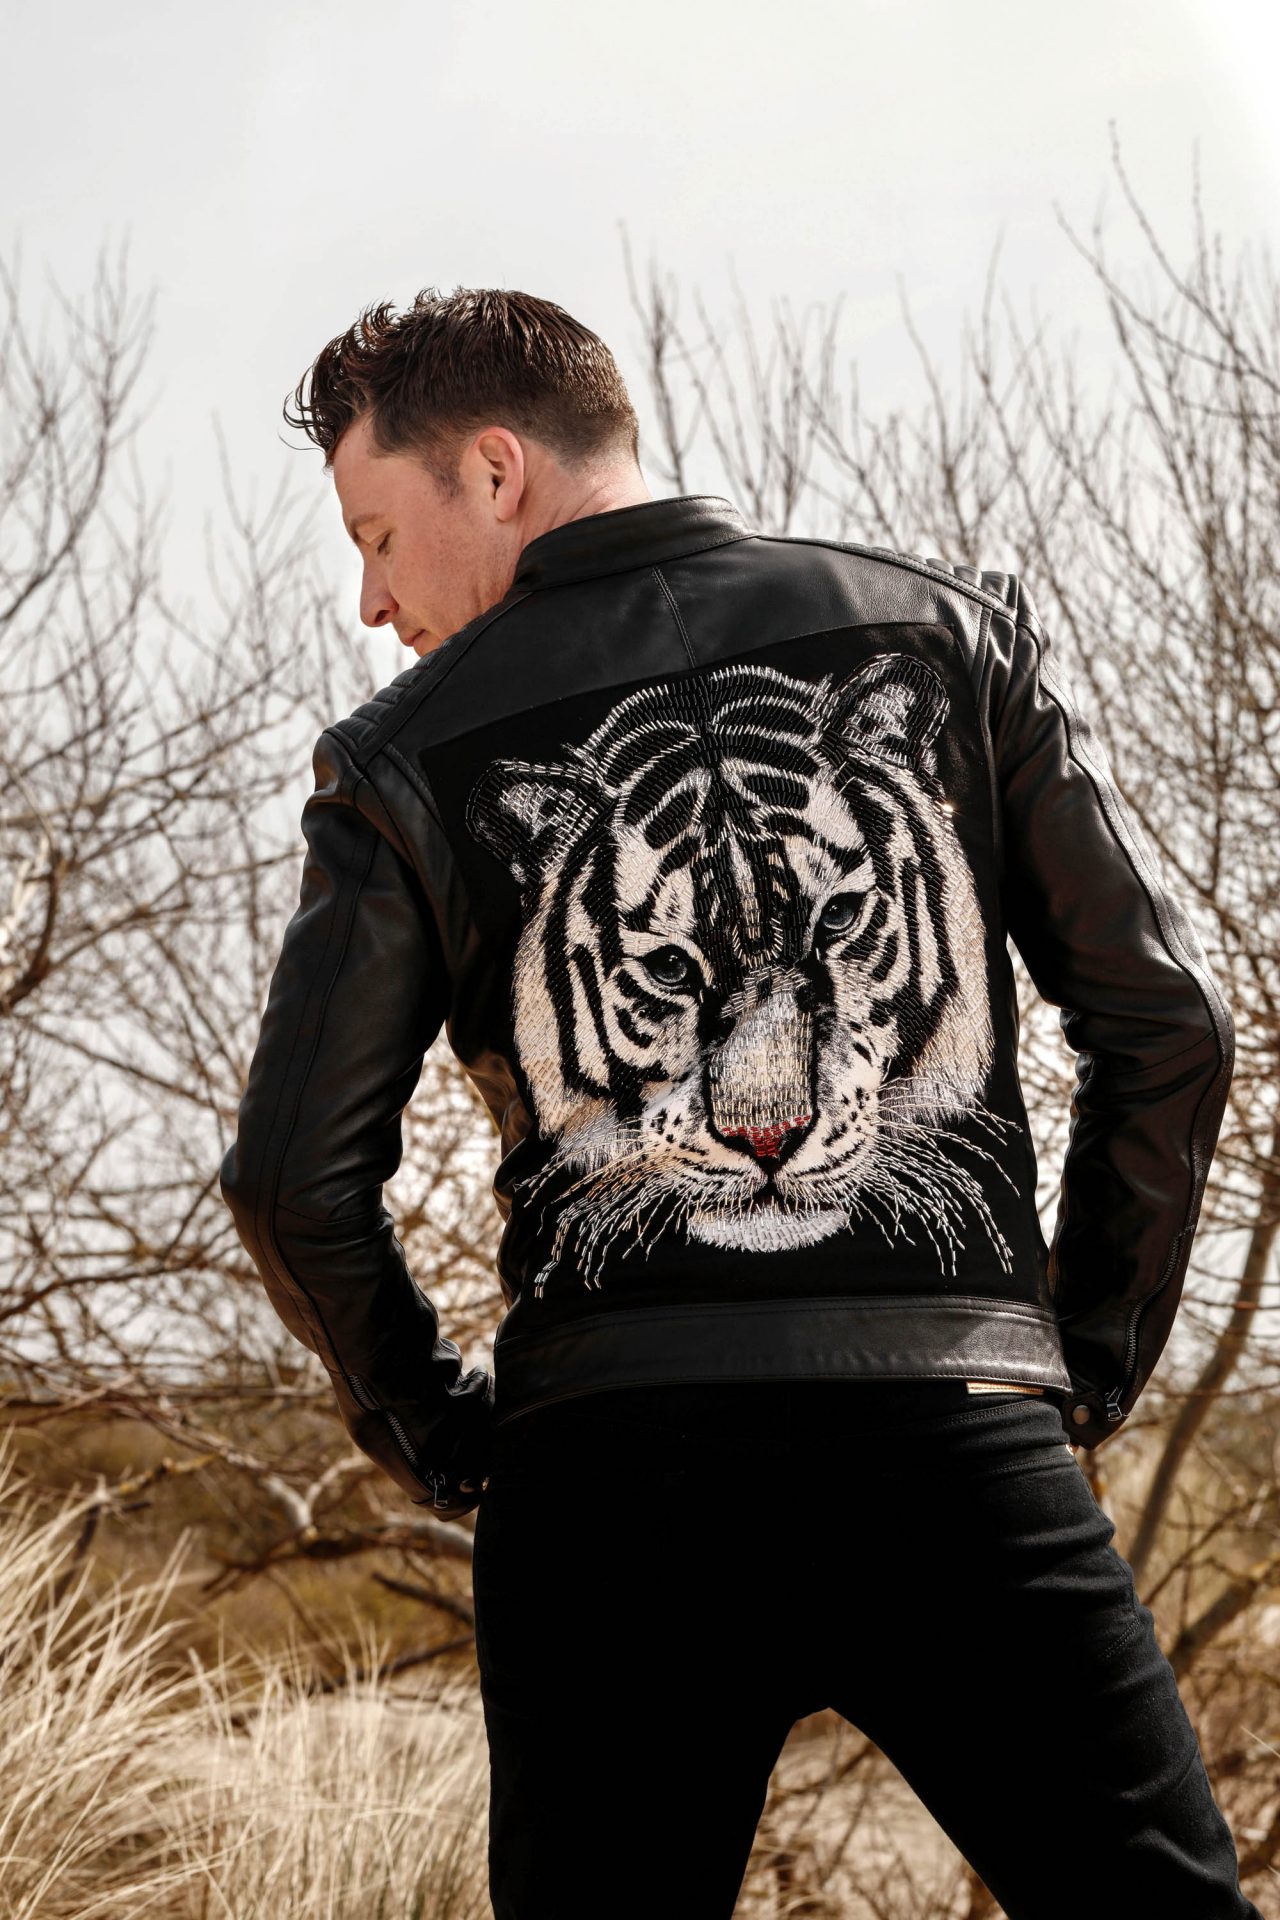 Black Leather Jacket with Tiger head embroided on back SMJ3